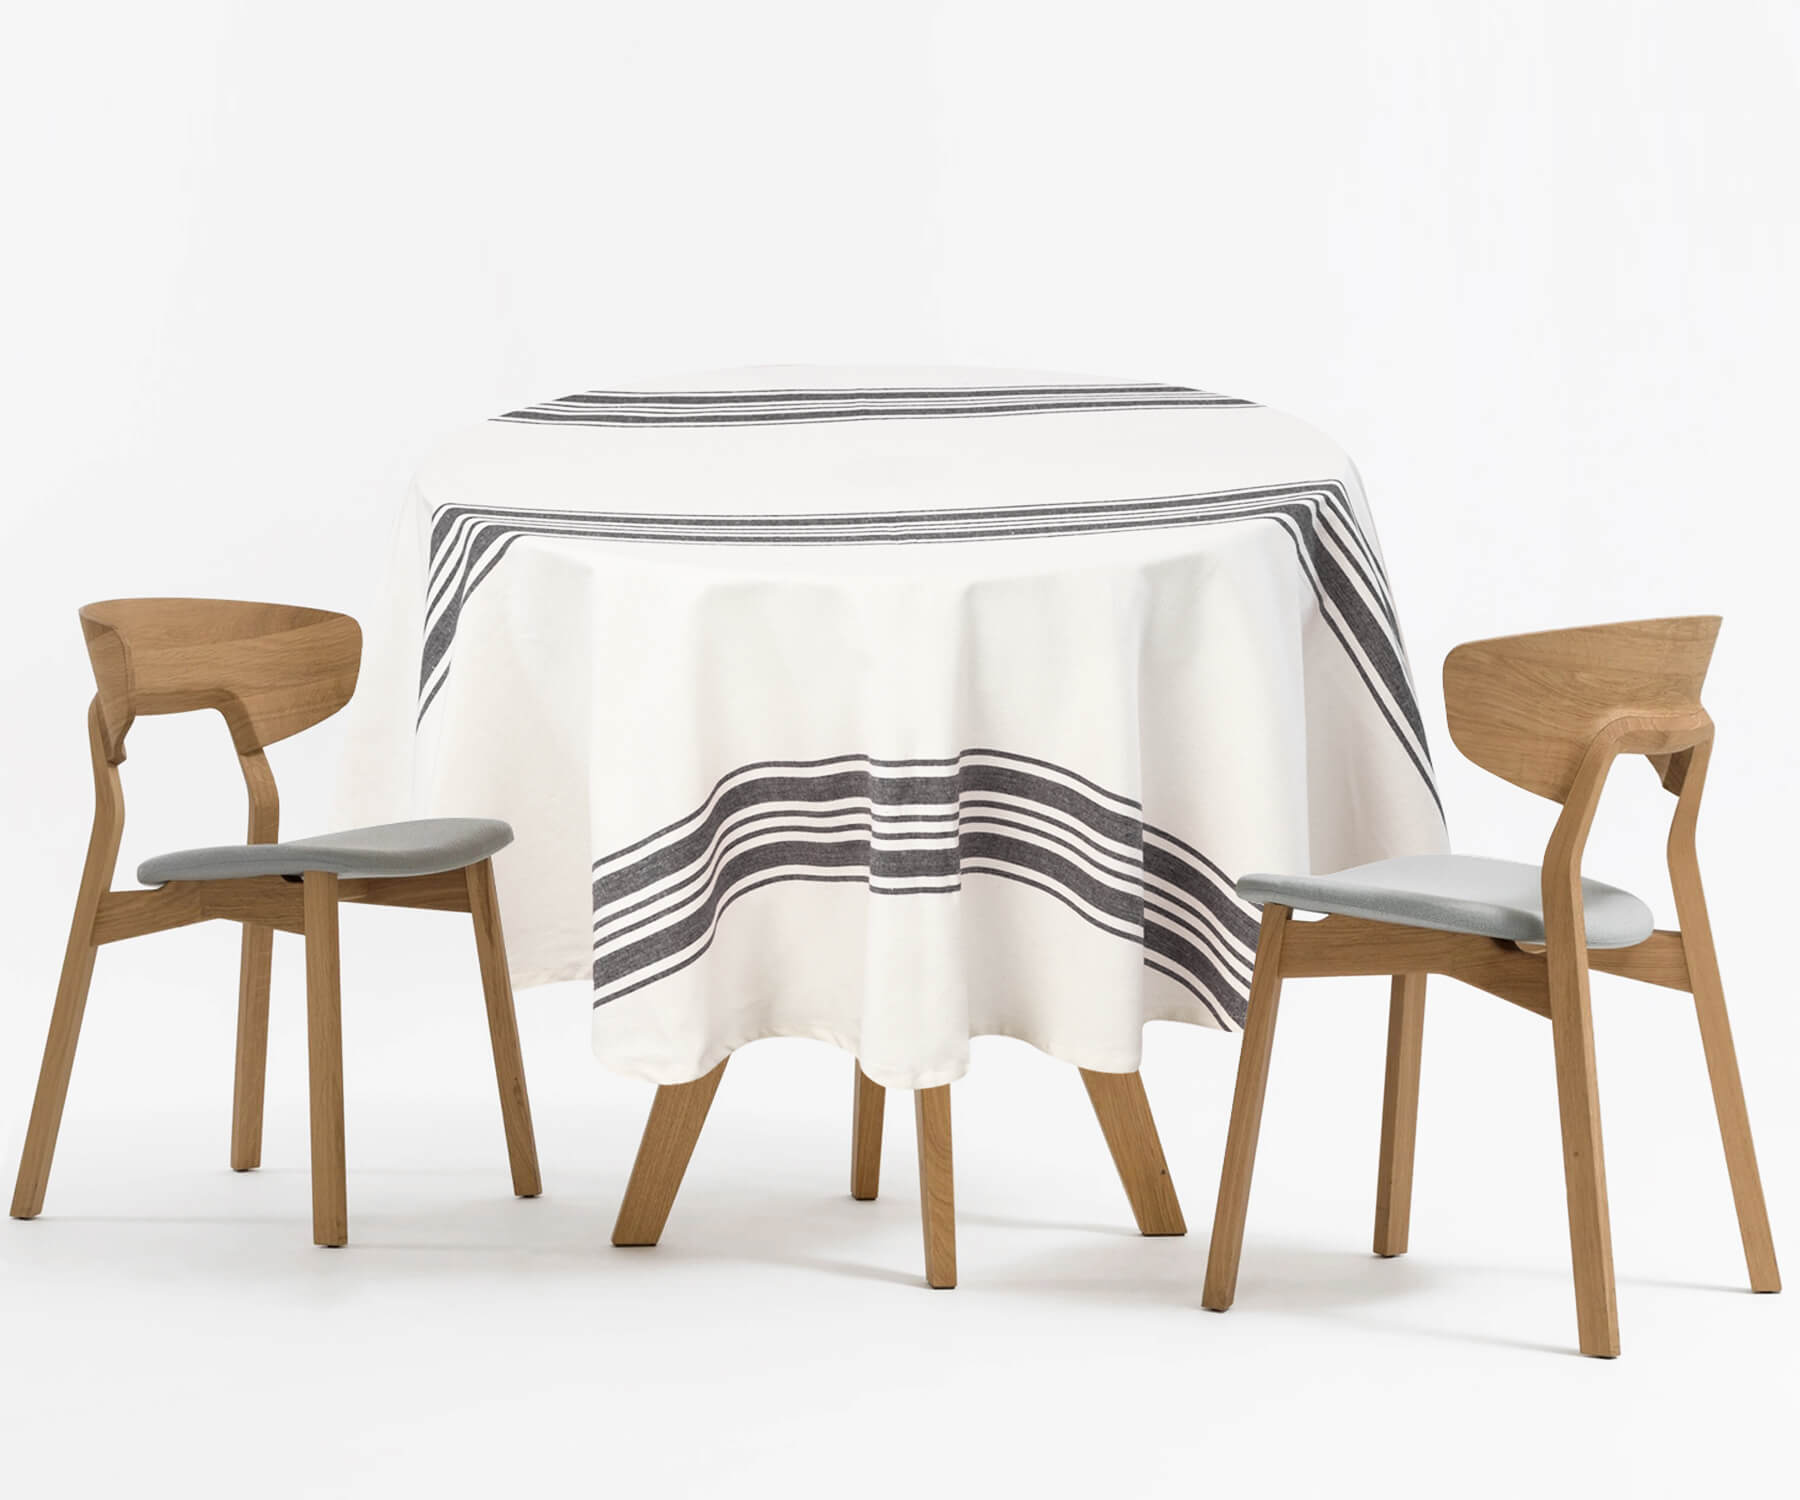 Round outdoor tablecloth on a table setup with two chairs